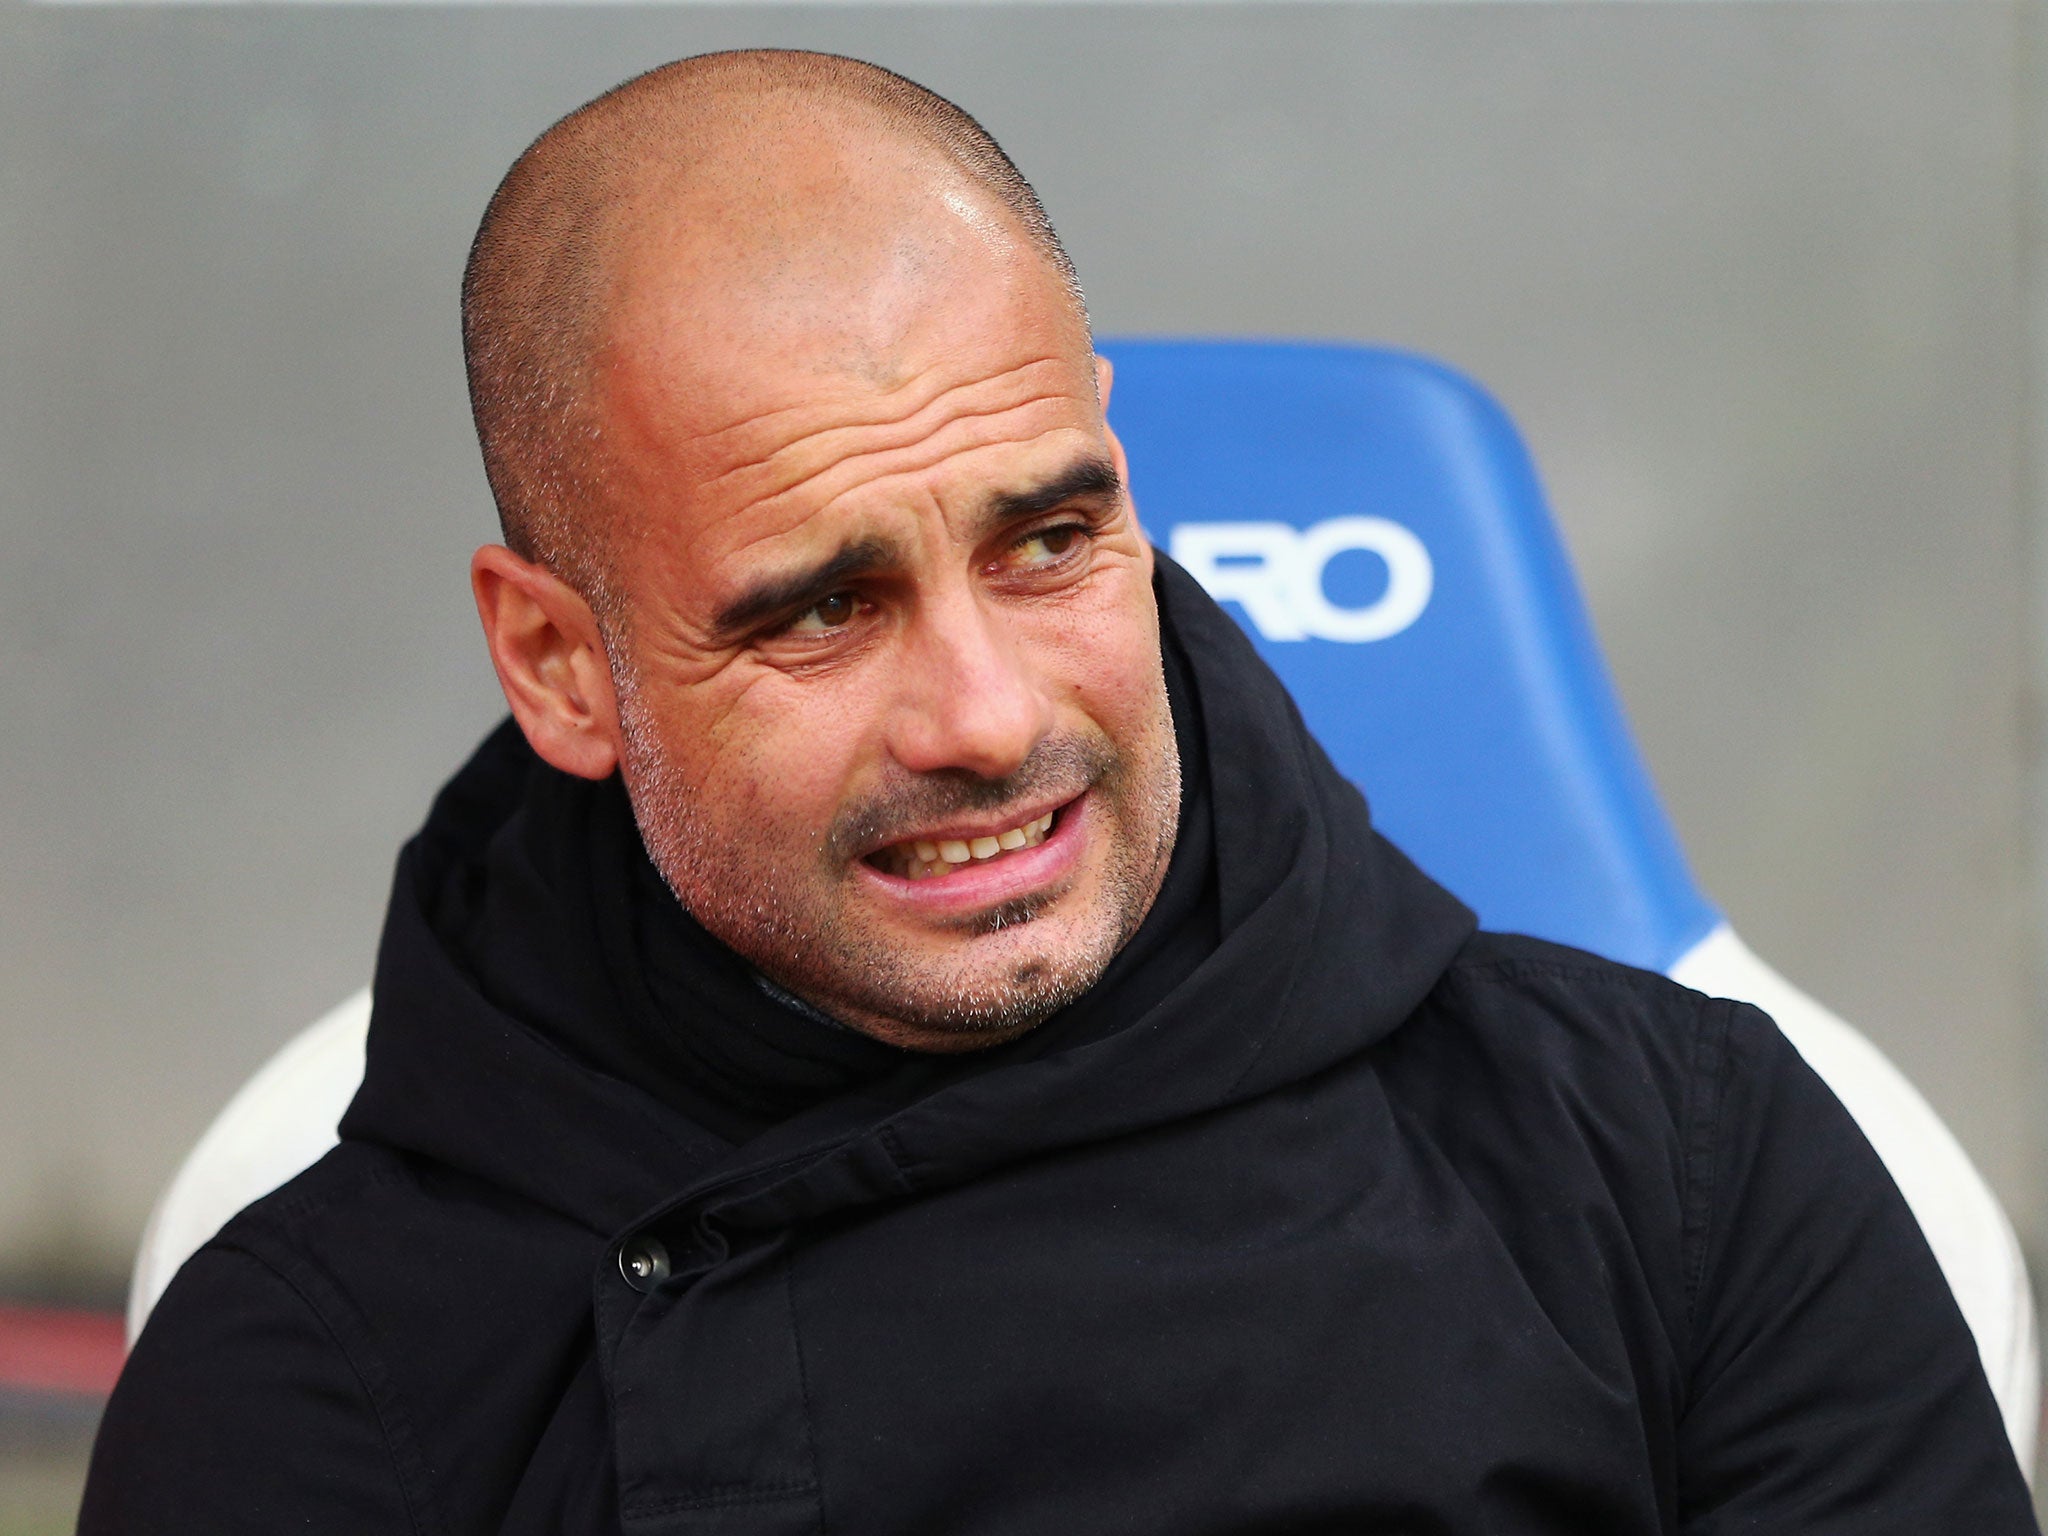 Pep Guardiola was reported to have met with Manchester United last week